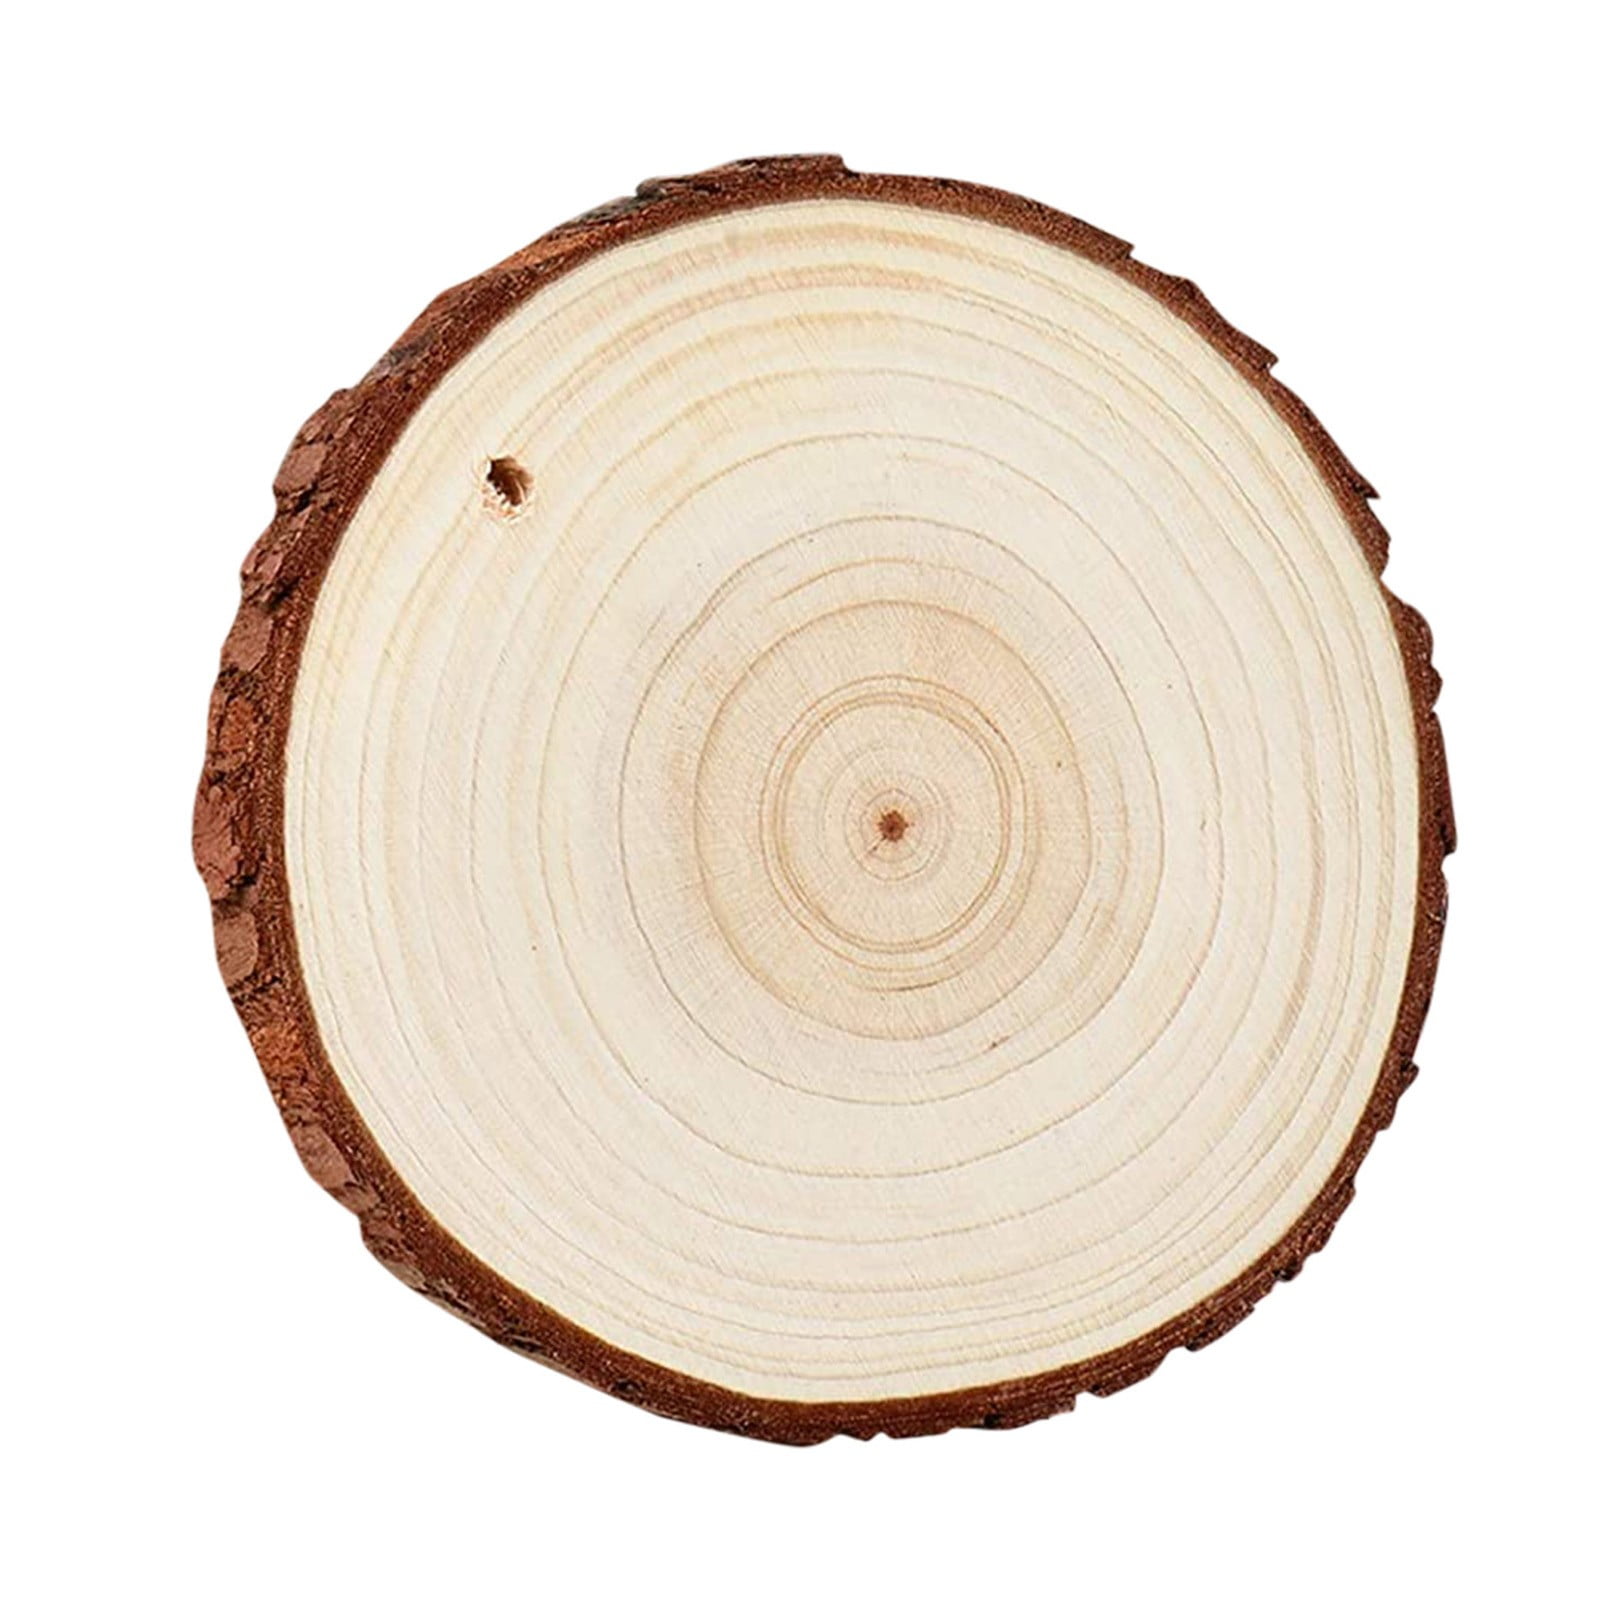 Colorations® Natural Wood Slices, Pre-Drilled - Set with Twine